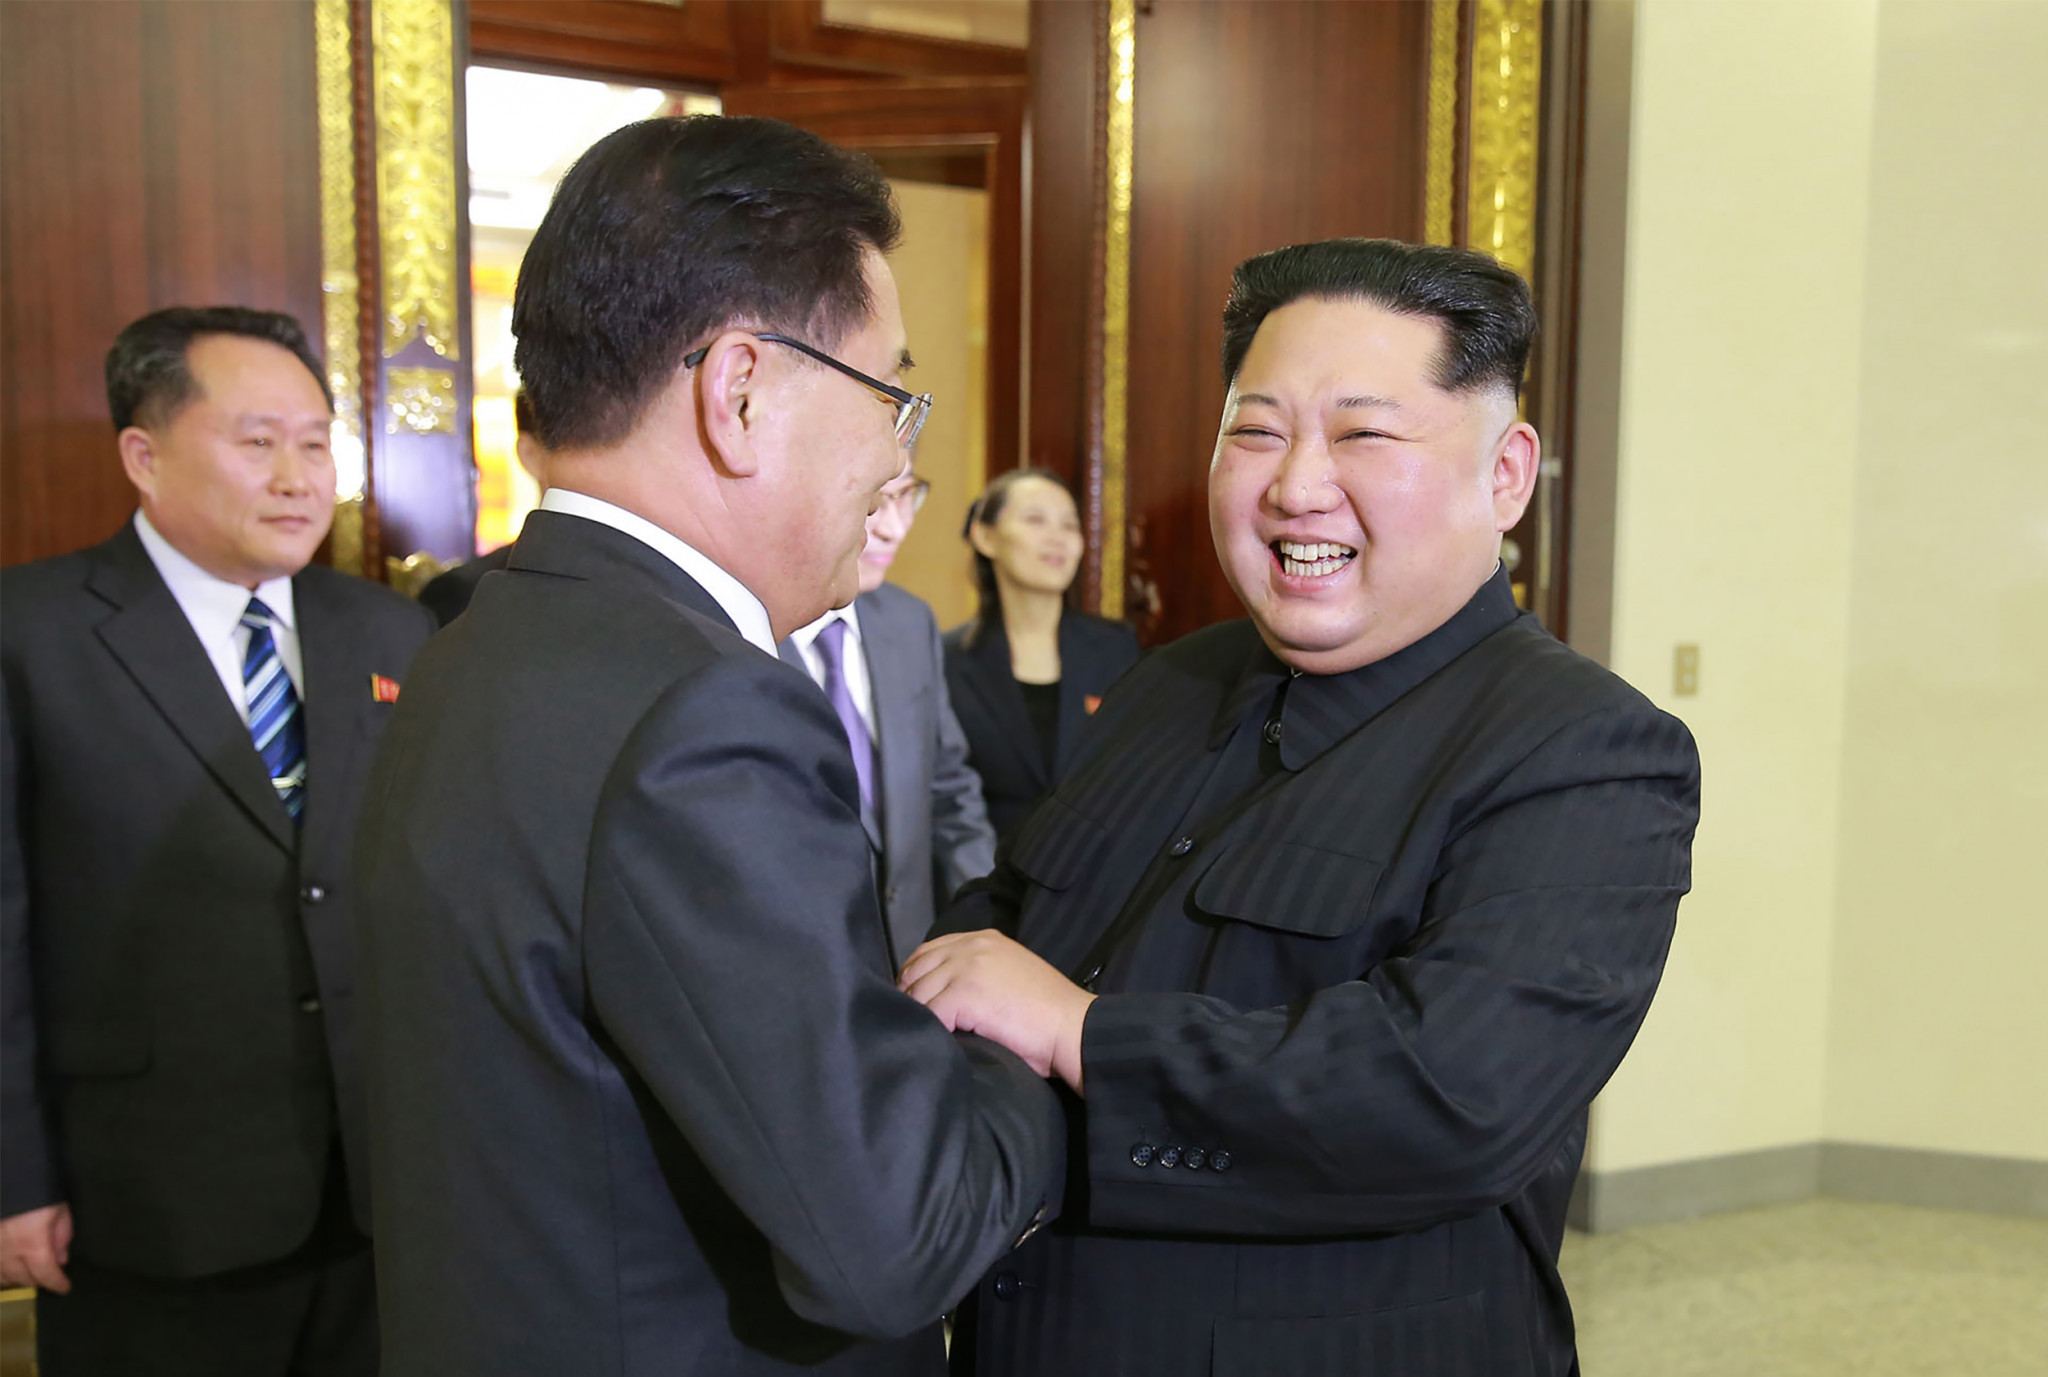 North Korea's leader Kim Jong-un met with South Korean officials earlier this week ©Getty Images